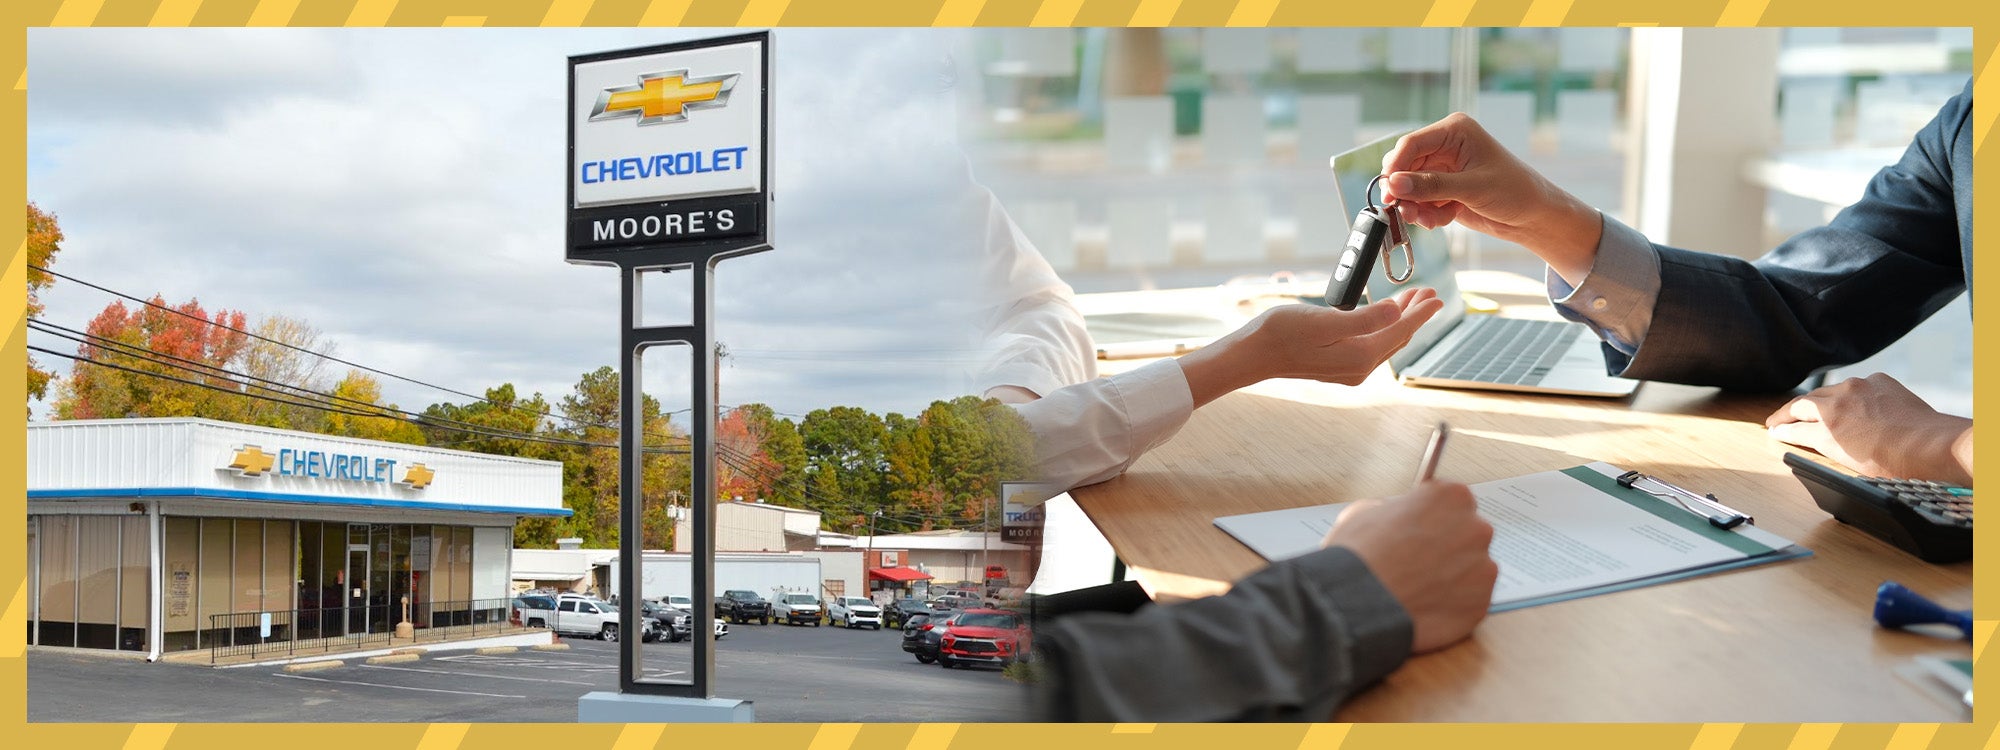 Why Buy From Moore’s Chevrolet?